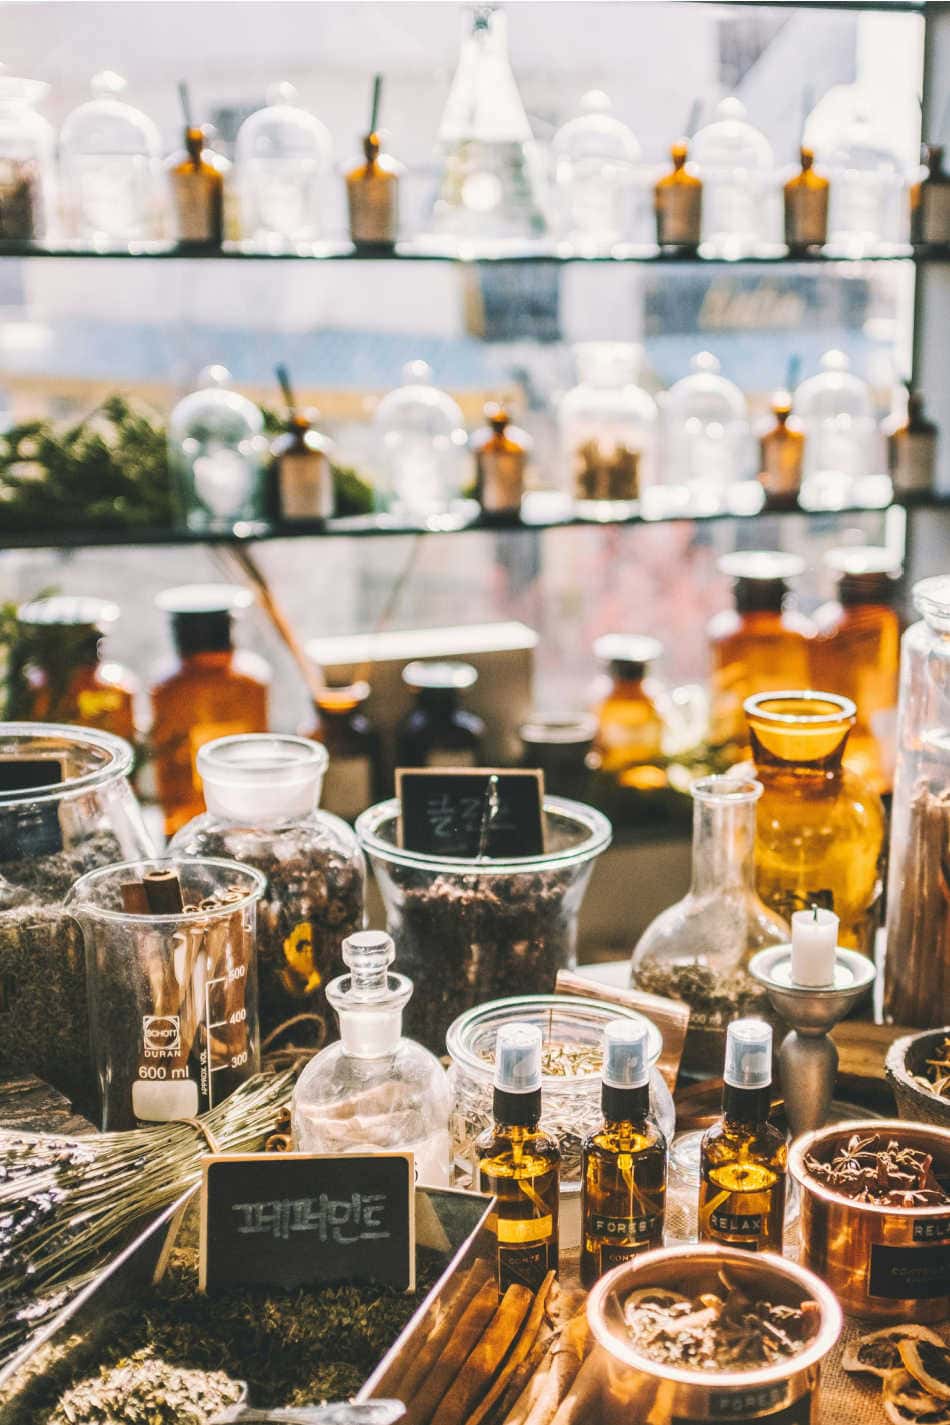 5 Inspiring Home Apothecary Ideas | Growing Up Herbal | Home apothecary ideas to inspire you on your herbal journey as you learn how to use herbs and make a variety of herbal preparations. 